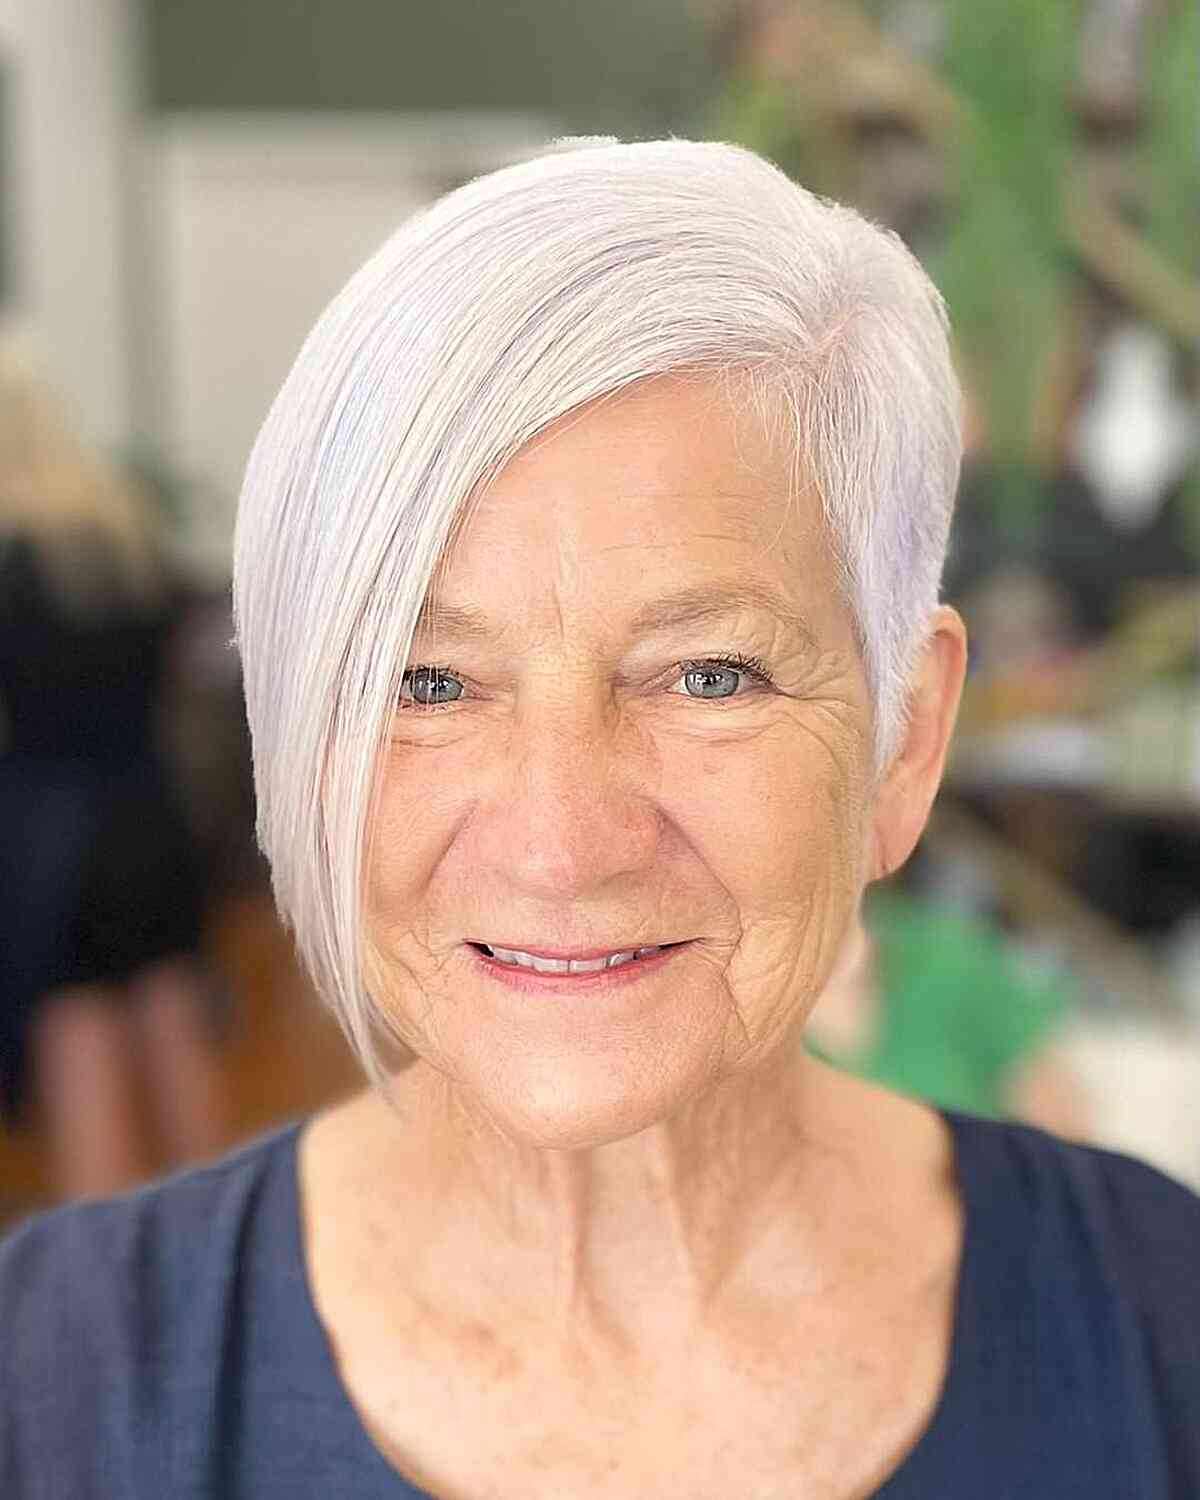 Asymmetric Disconnected Shape for Women Aged 60 with thin hair